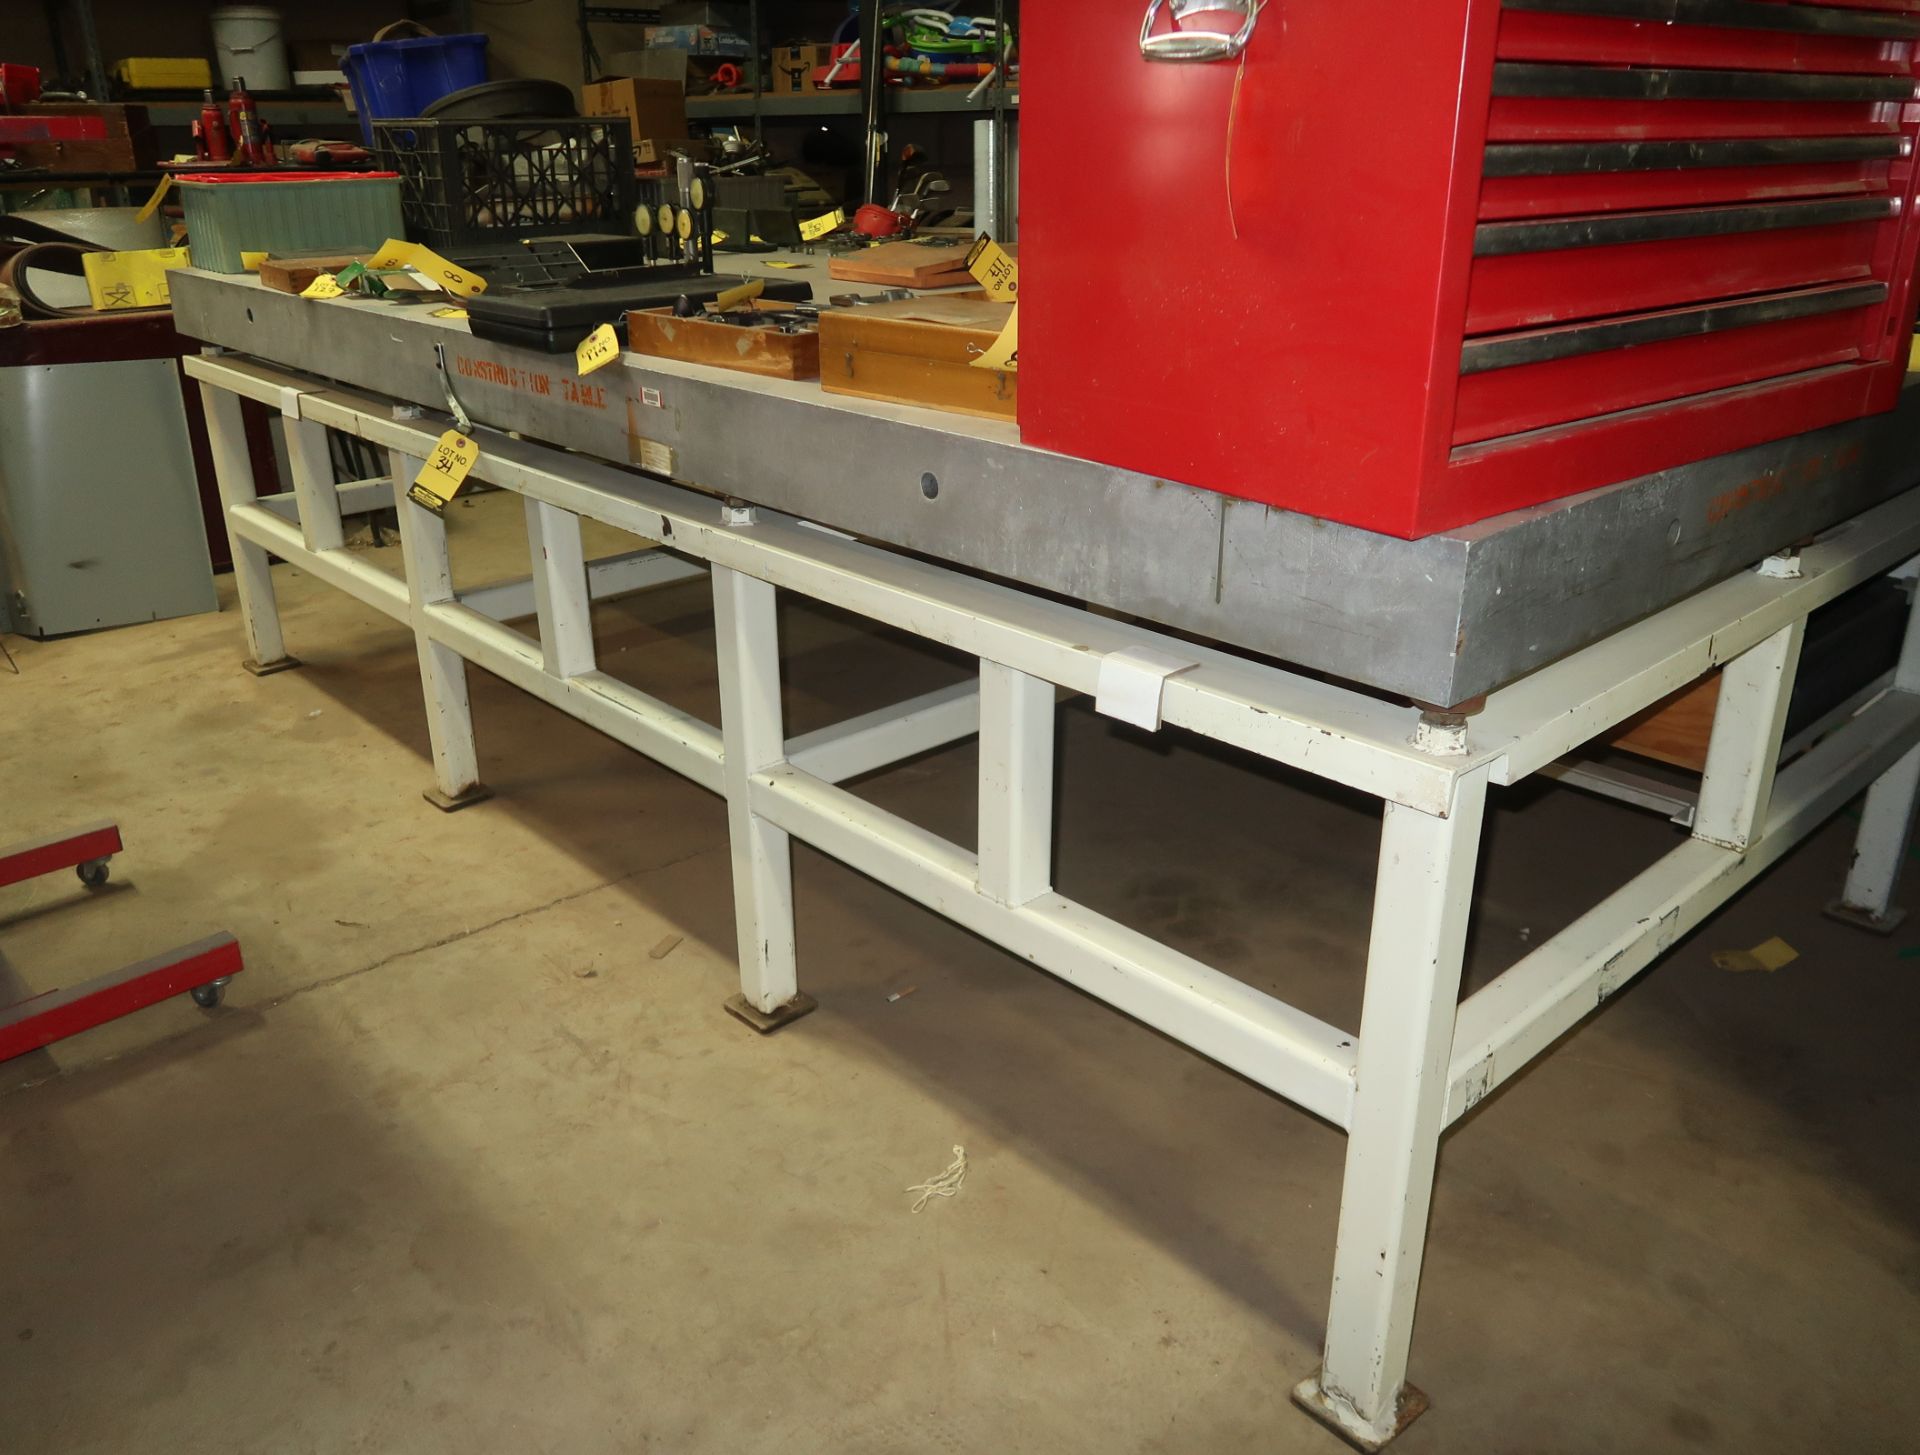 5'X10'X5" ALUMINUM INSPECTION TABLE W/ STAND, BOTTOM SIDE OF TABLE IS PRECISION MACHINED - Image 2 of 3